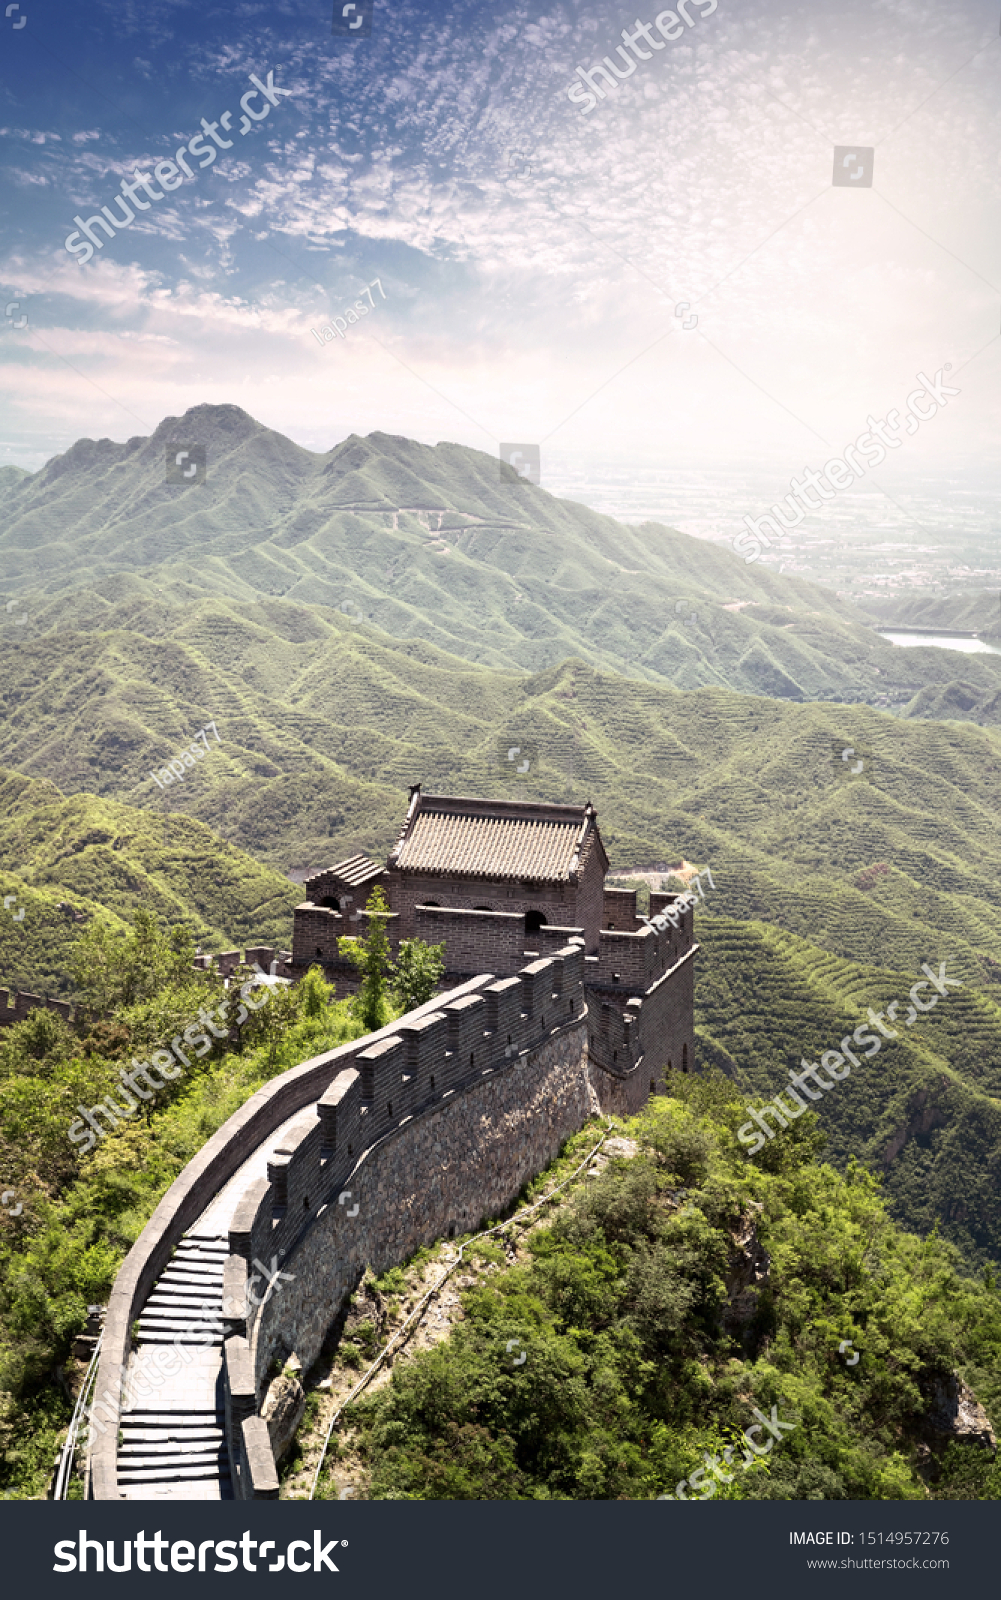 The famous Great Wall of China #1514957276